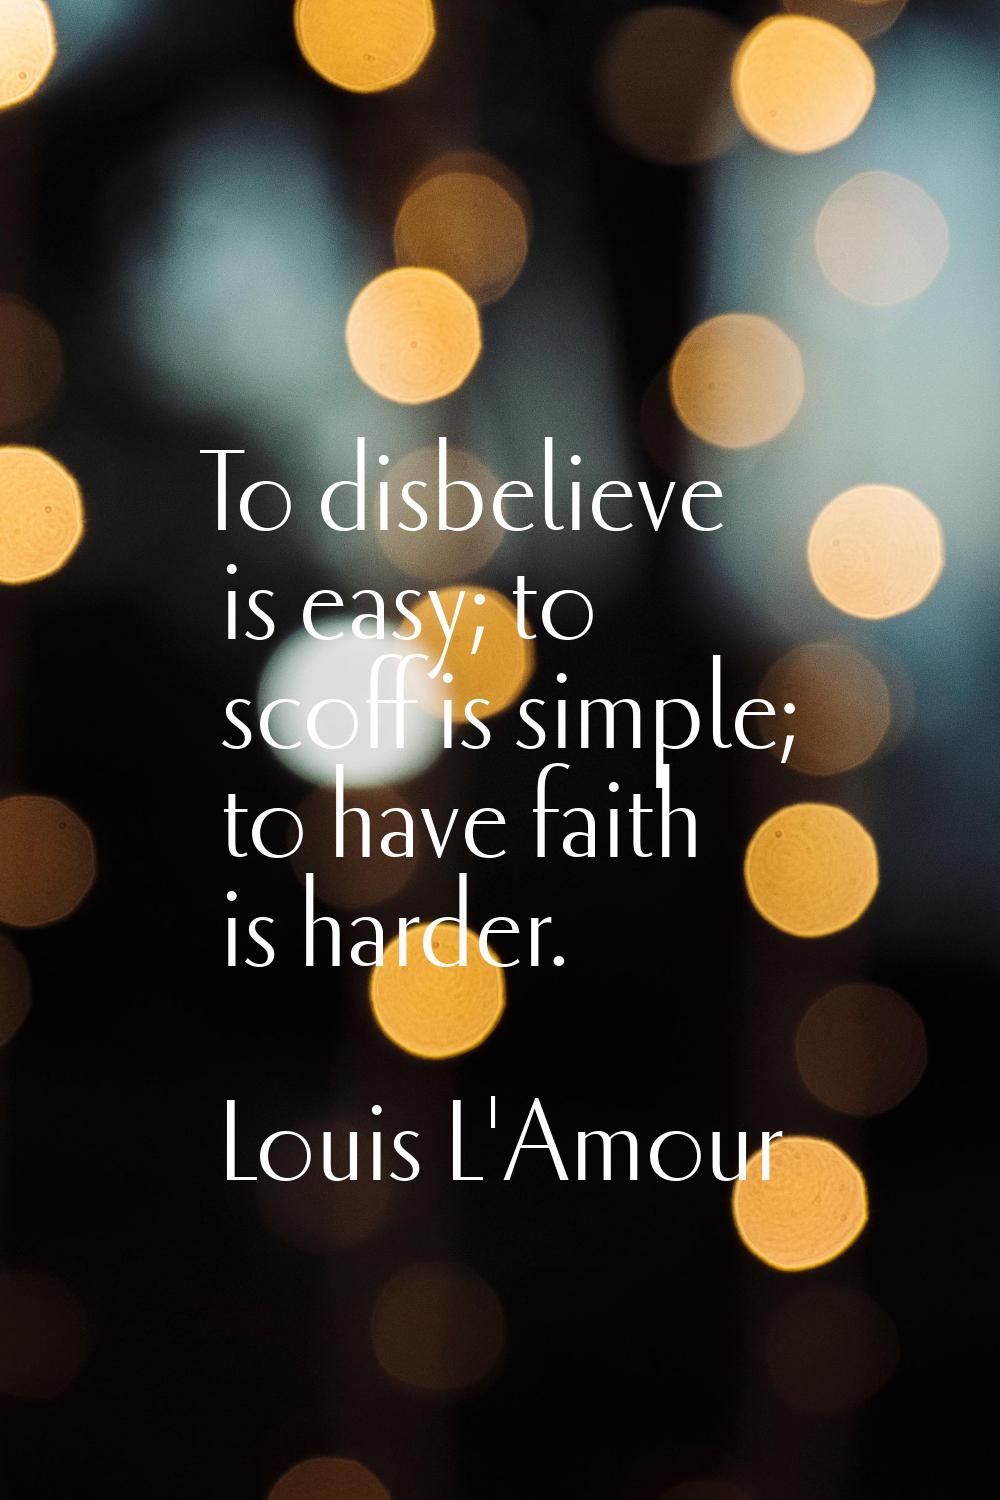 To disbelieve is easy; to scoff is simple; to have faith is harder.